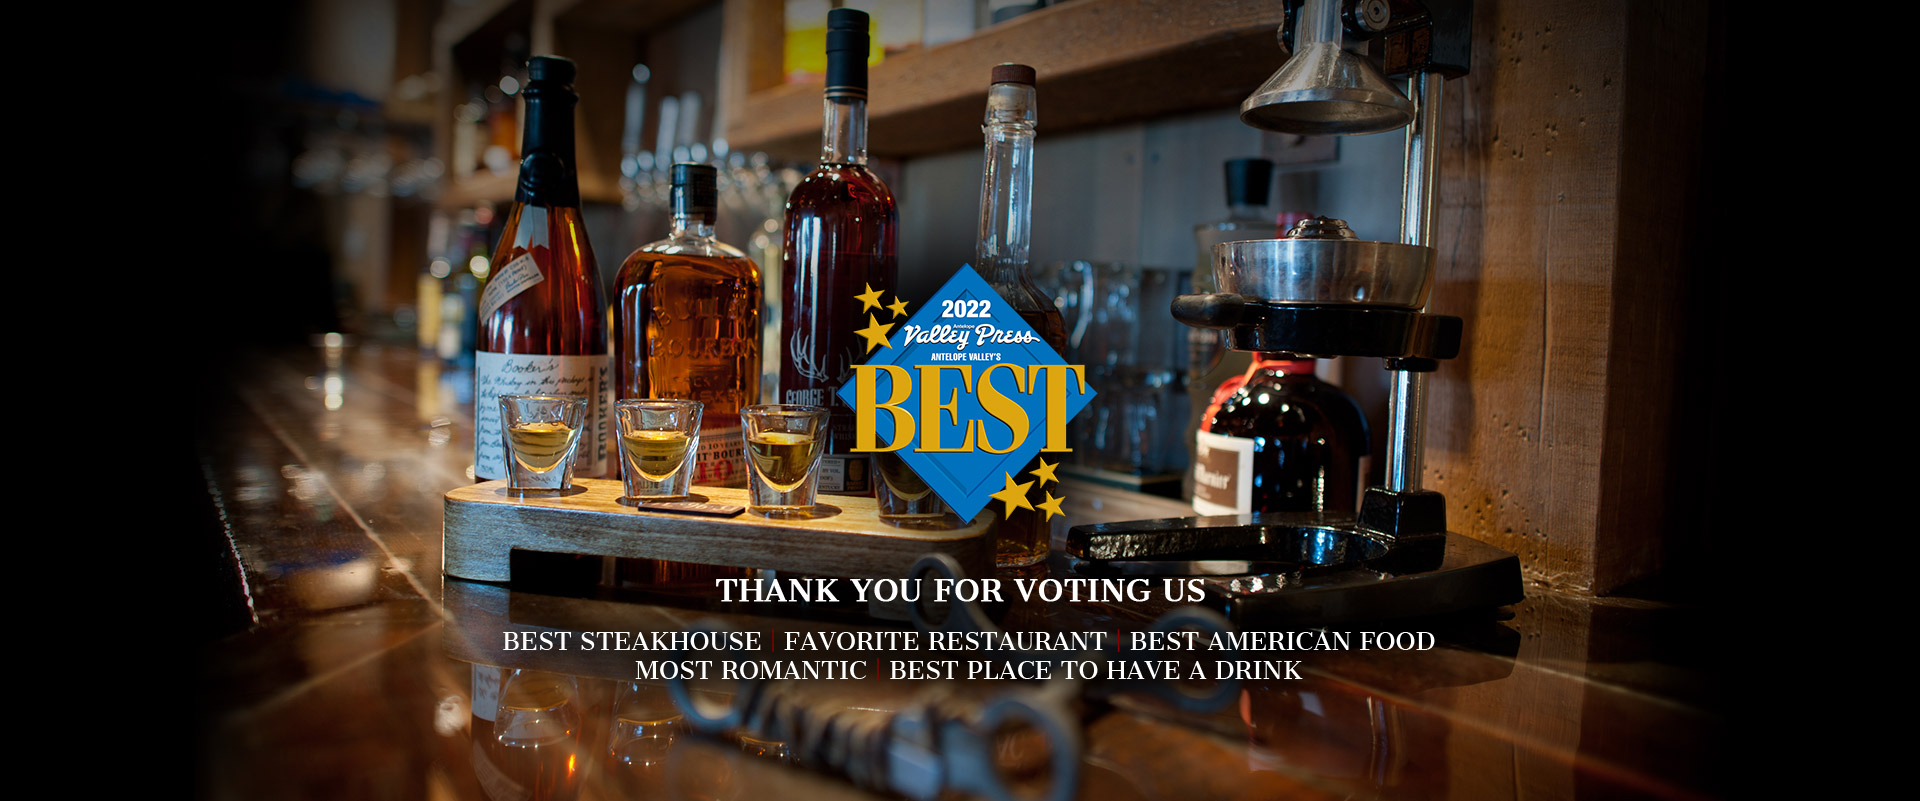 AVs Best 2022 - Thank you for voting us Best Steakhouse, Favorite Restaurant, Best American Food and more!